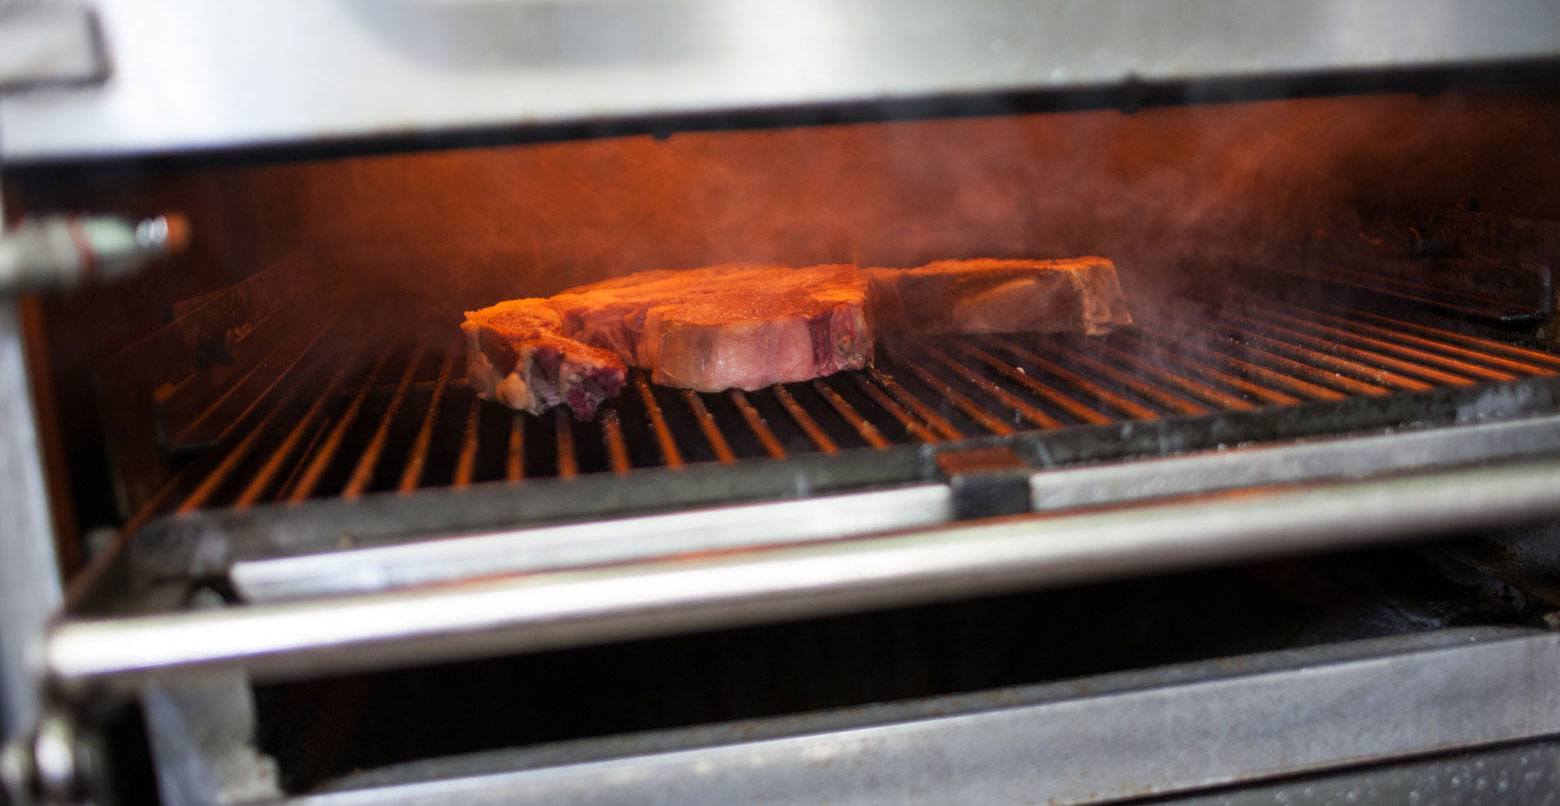 Steak Being Cooked in the Oven